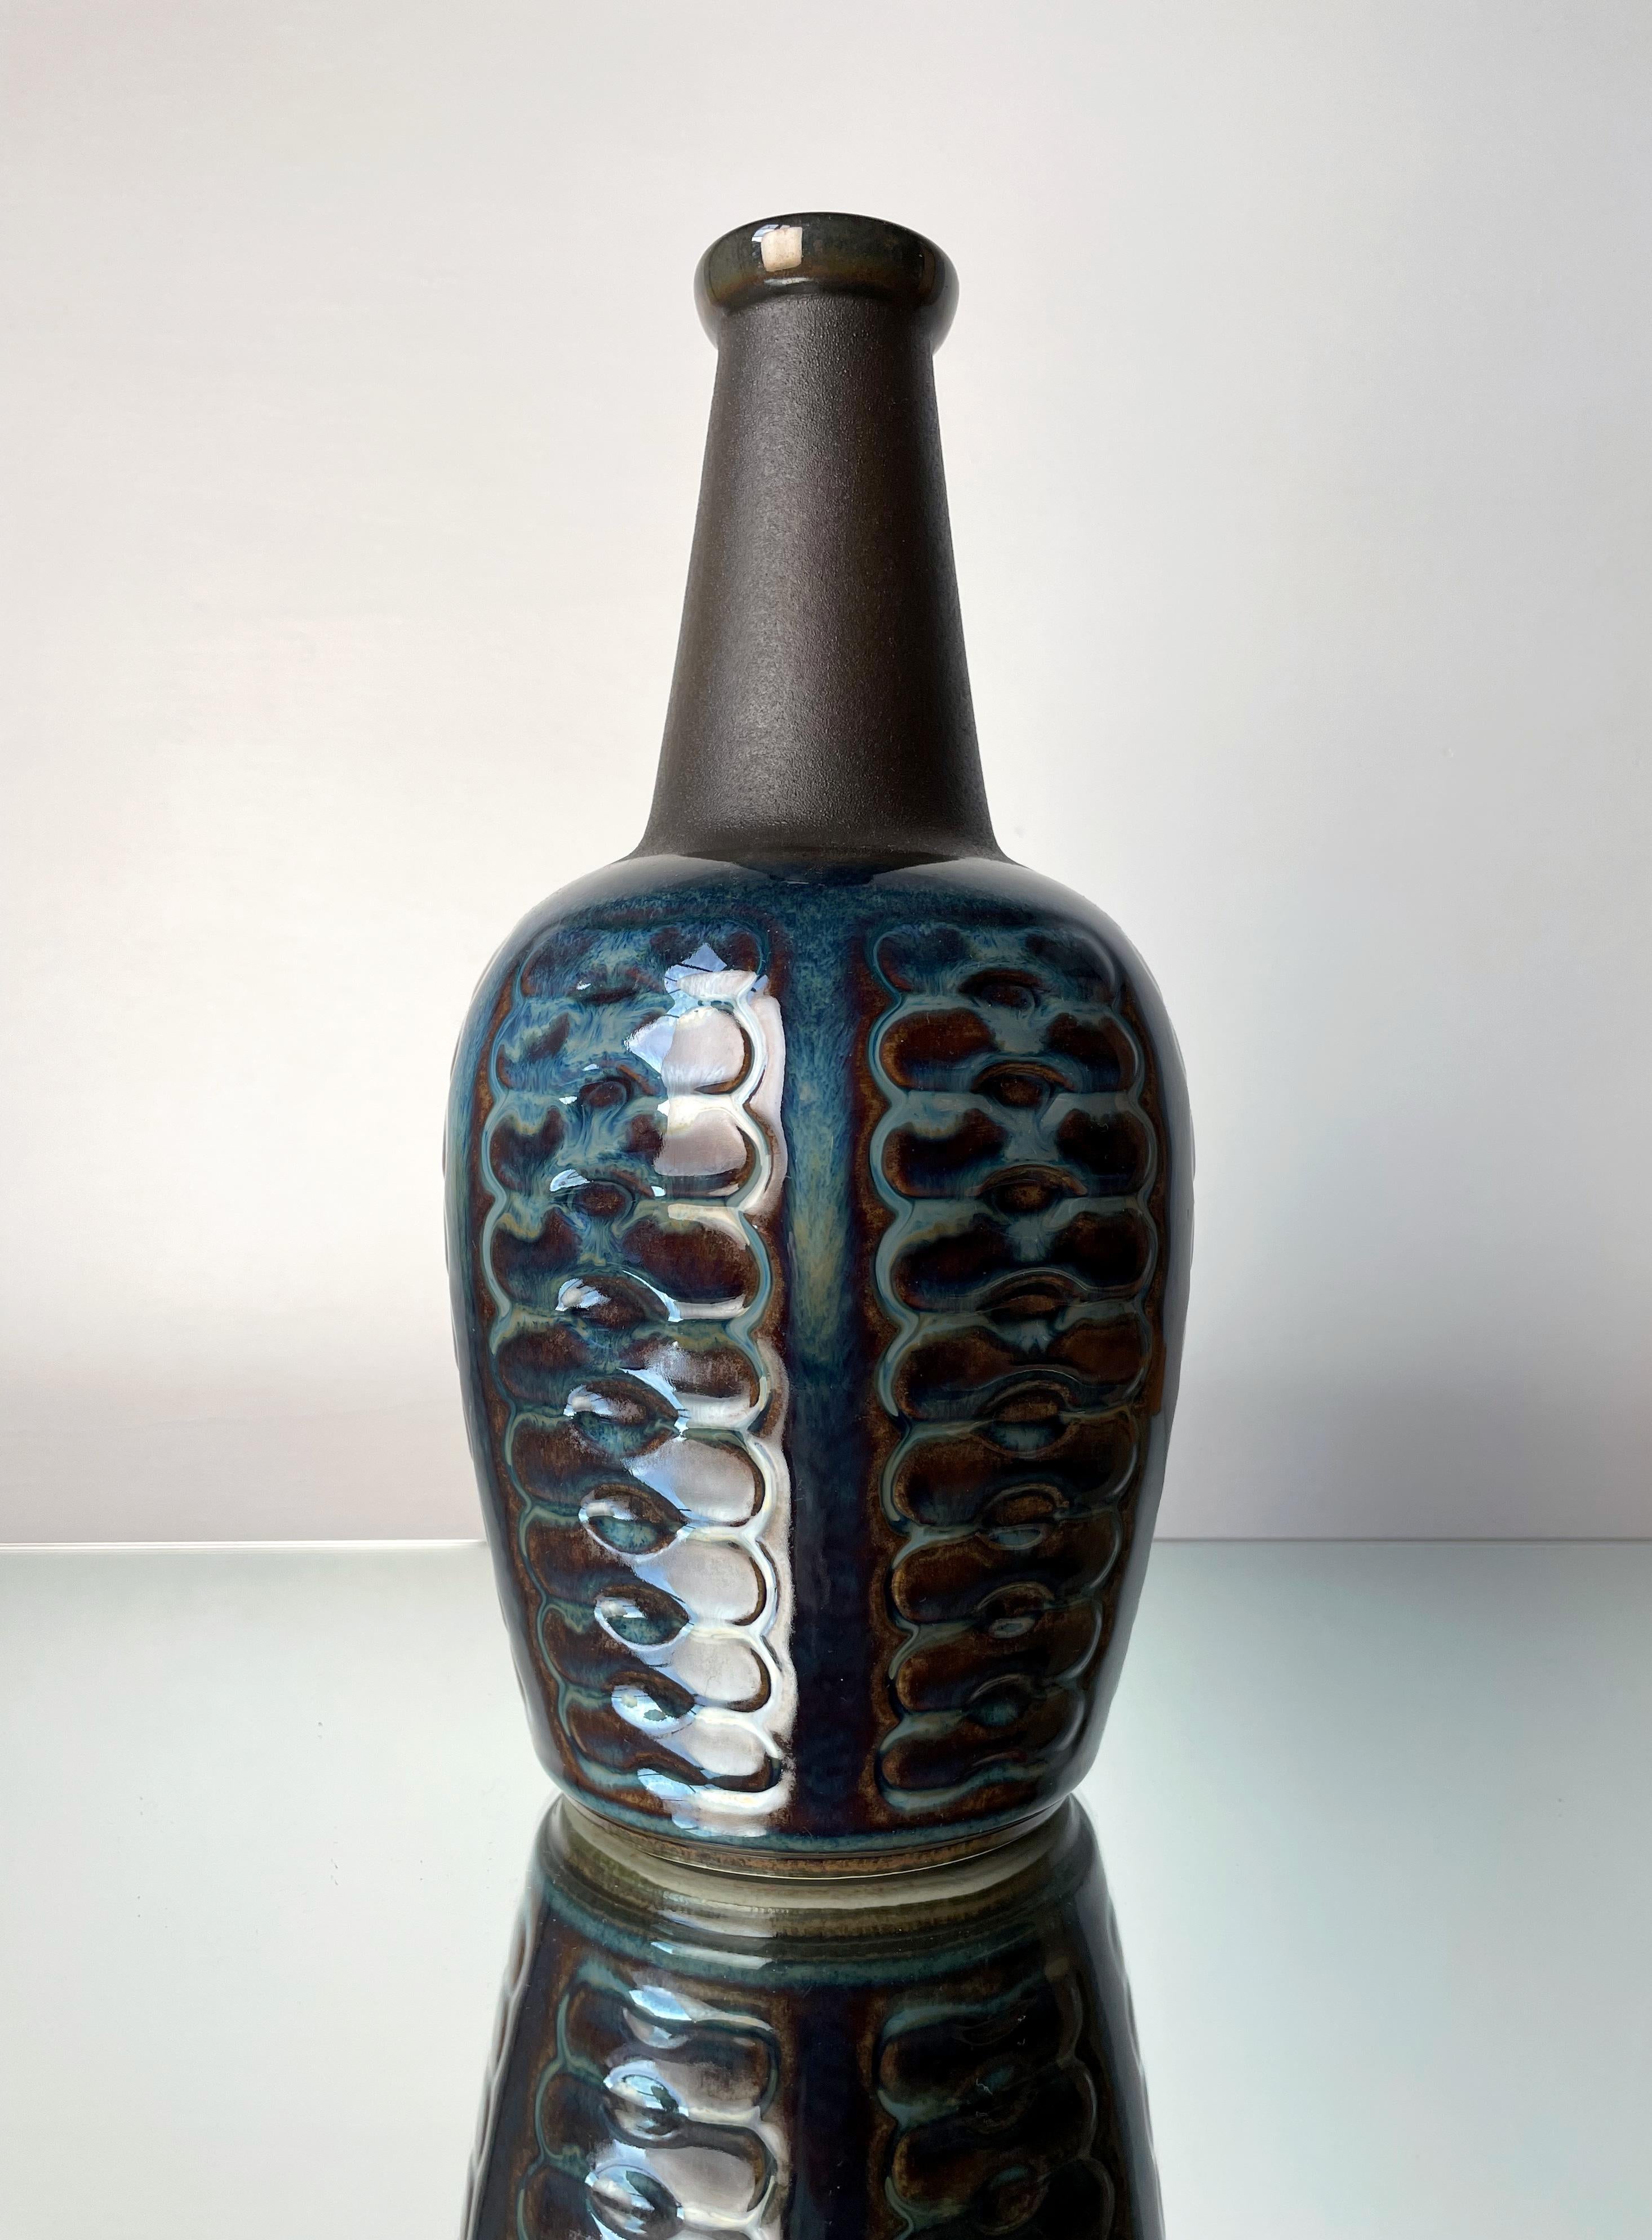 Chubby bottle shaped ceramic vase by artist Einar Johansen. Handmade graphic relief decor with running glaze in blue, light green and caramel colors around the belly as well as on the inside. Matte unglazed black neck. Manufactured on the Danish